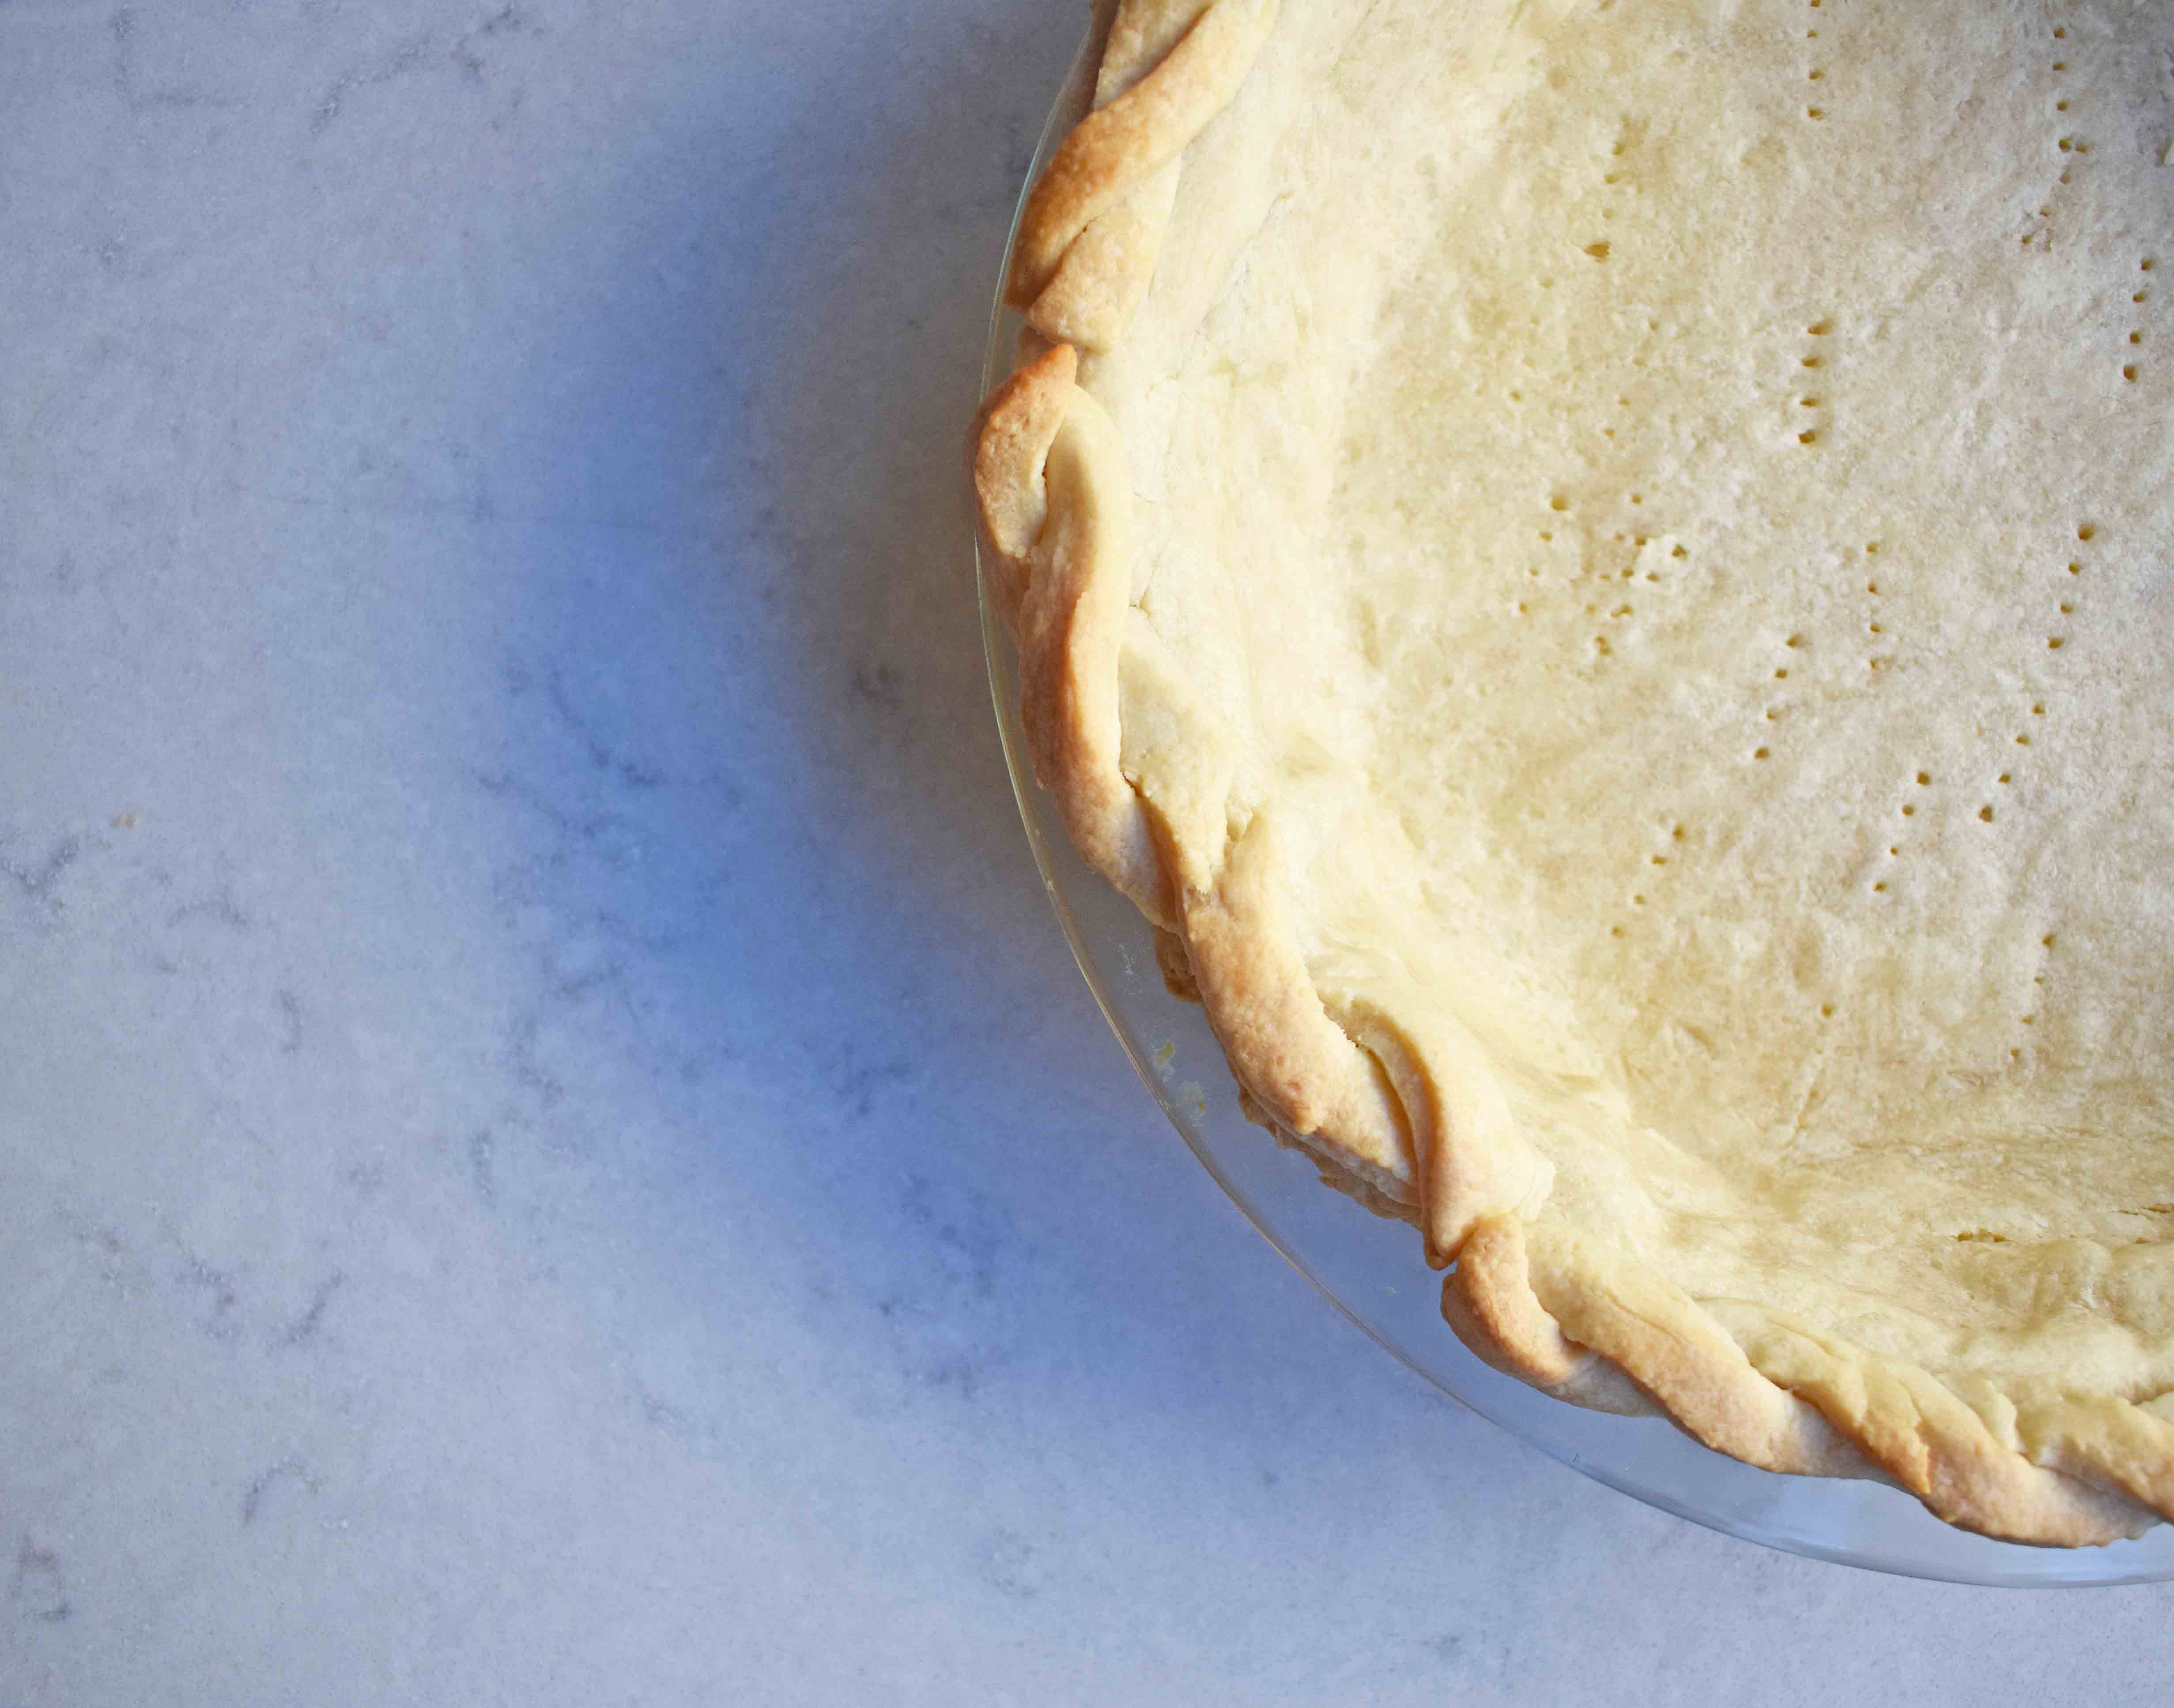 All Butter Flaky Pie Crust. Tips and tricks to make foolproof perfect pie crust every single time. www.modernhoney.com